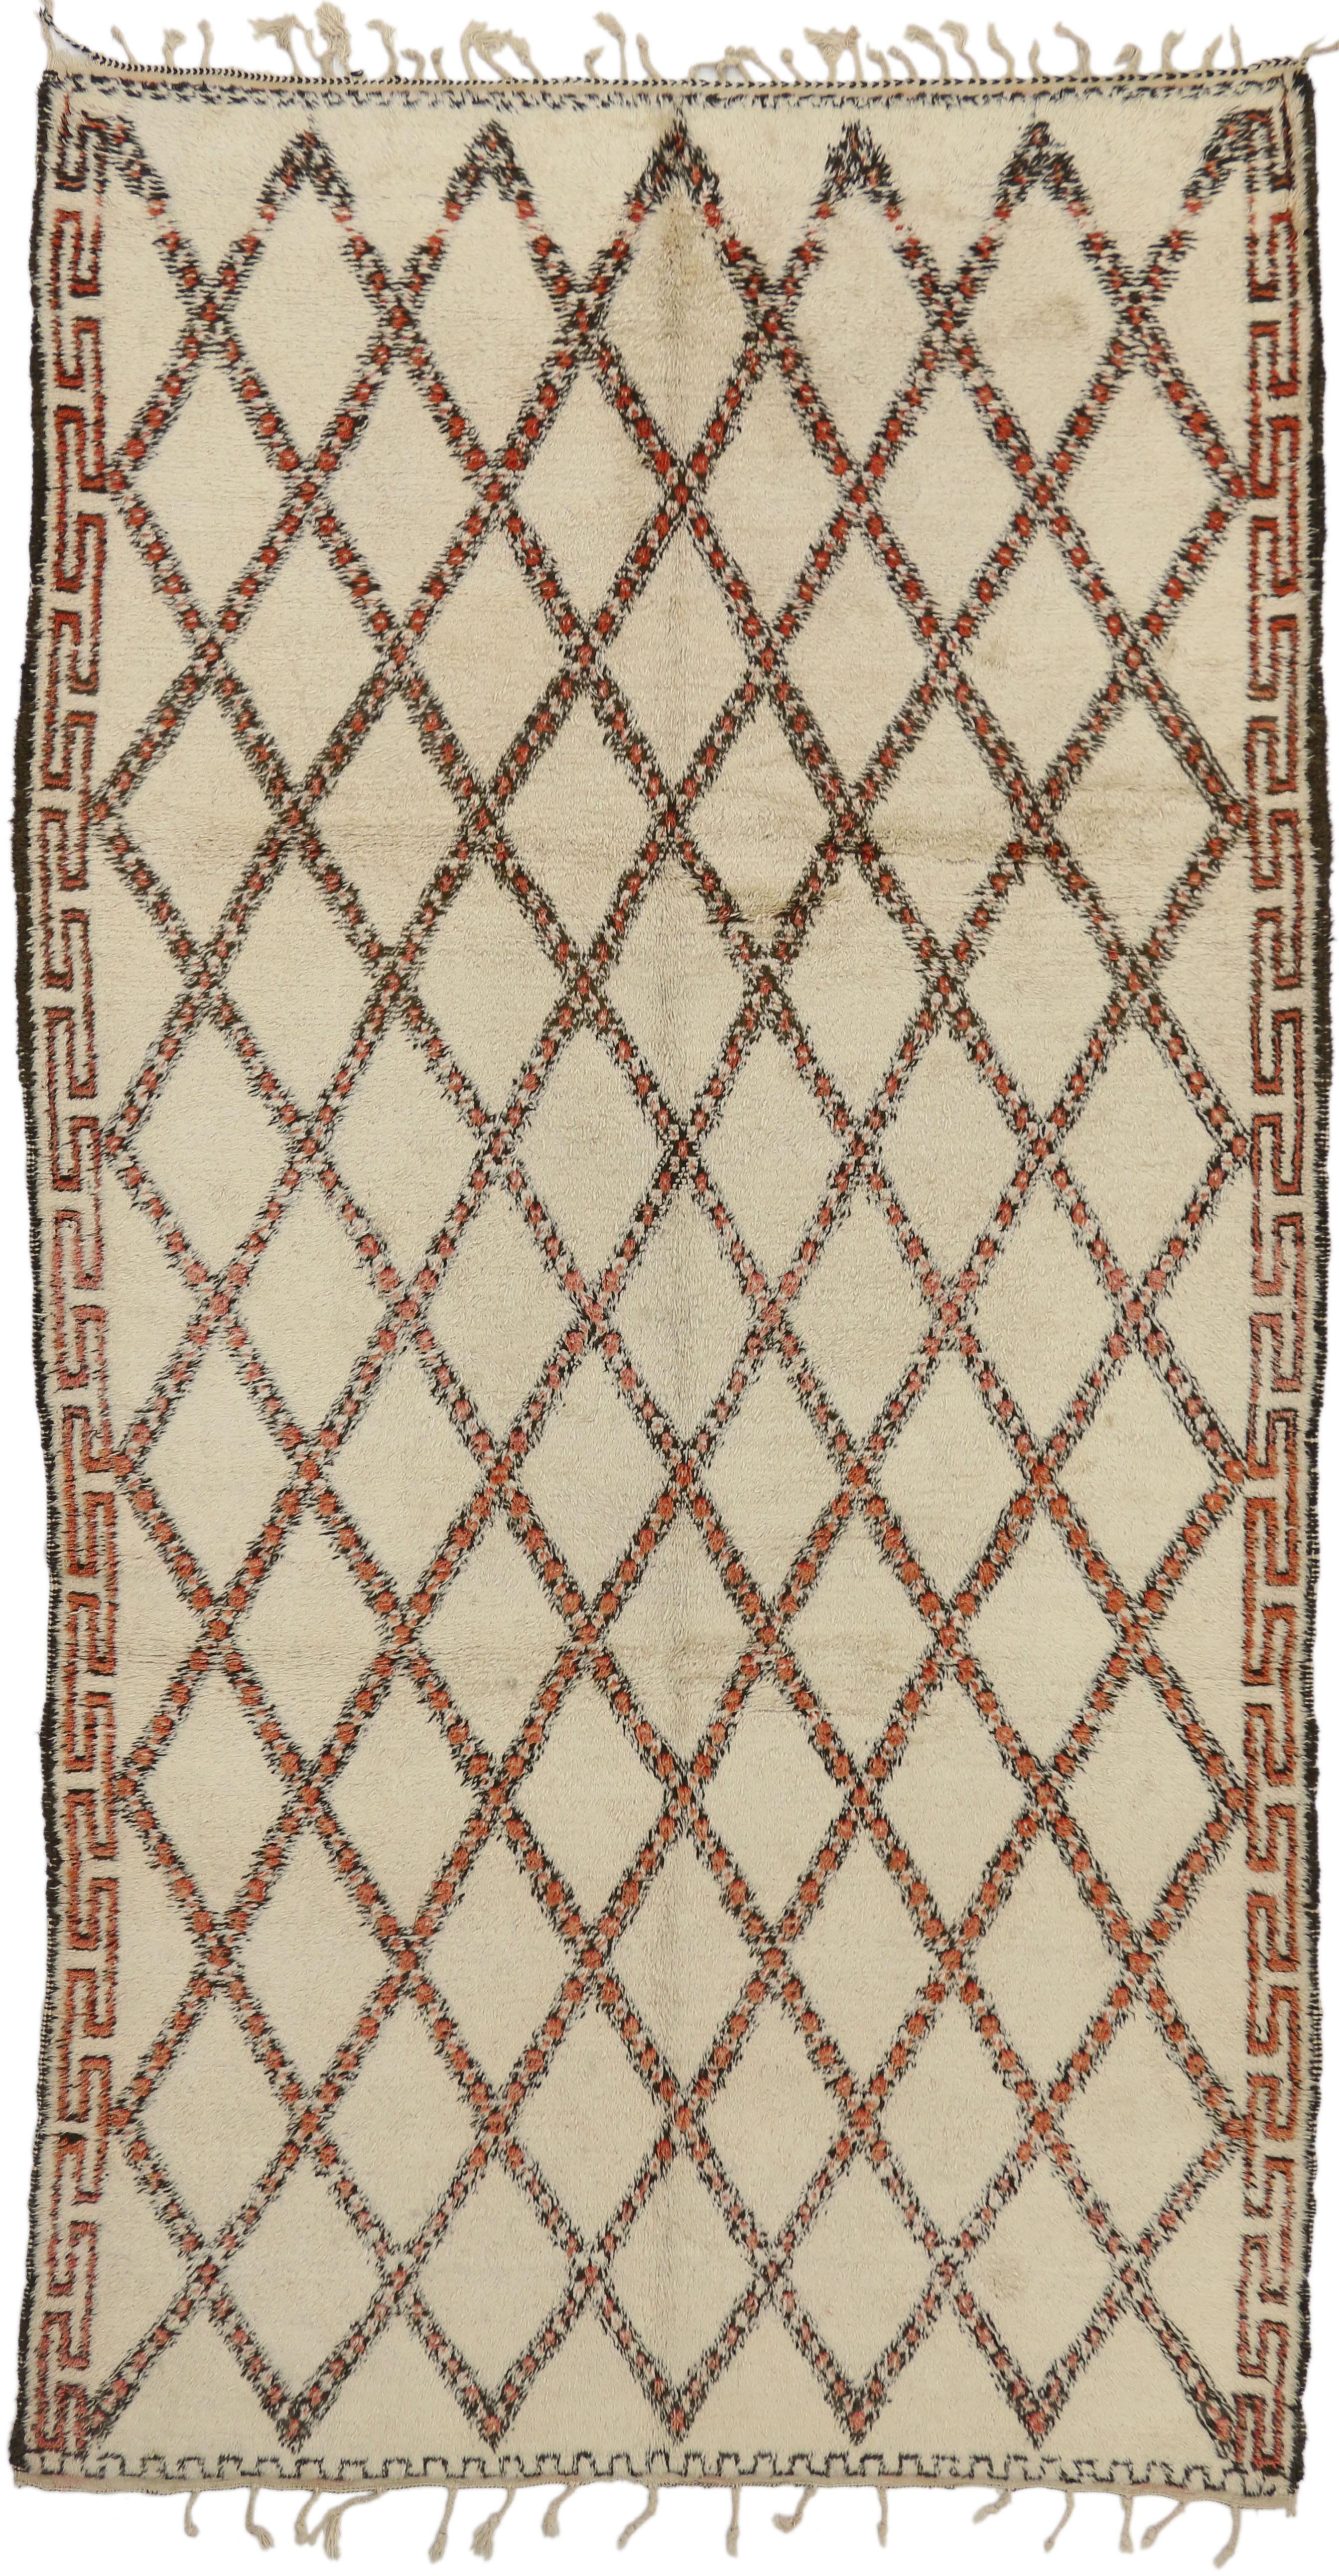 74727, vintage Beni Ourain Moroccan rug in traditional style. This hand-knotted wool vintage Beni Ourain Moroccan rug with Mid-Century Modern style features a lozenge trellis pattern on a neutral background. Bold, thick lines of black, coffee, red